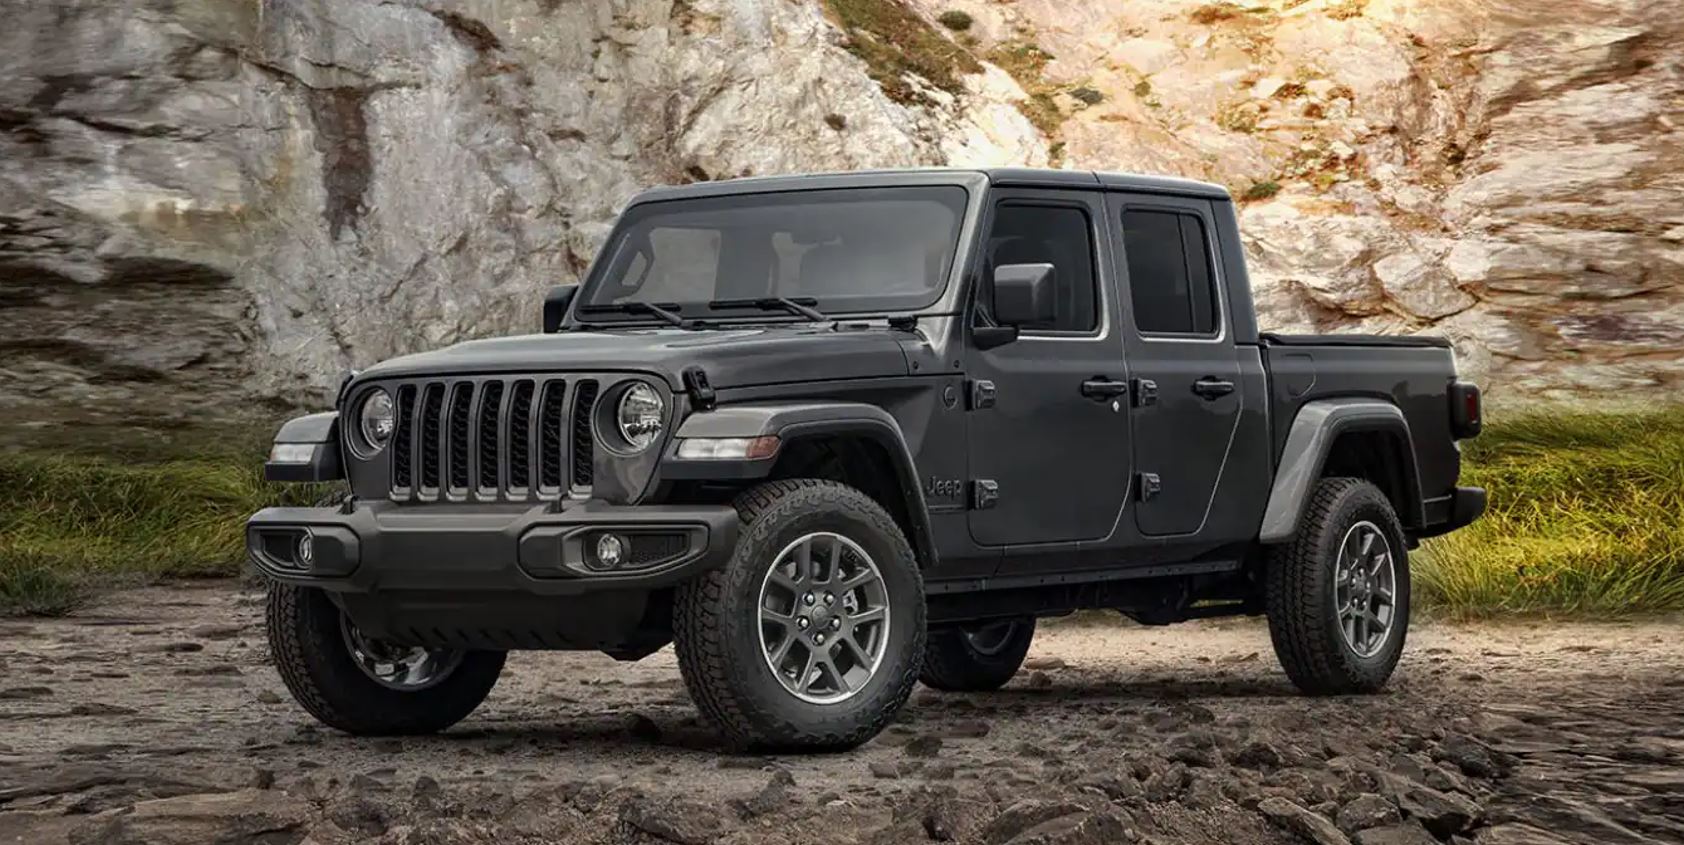 New Jeep available in Leesburg, FL at Advantage Chrysler Dodge Jeep Ram